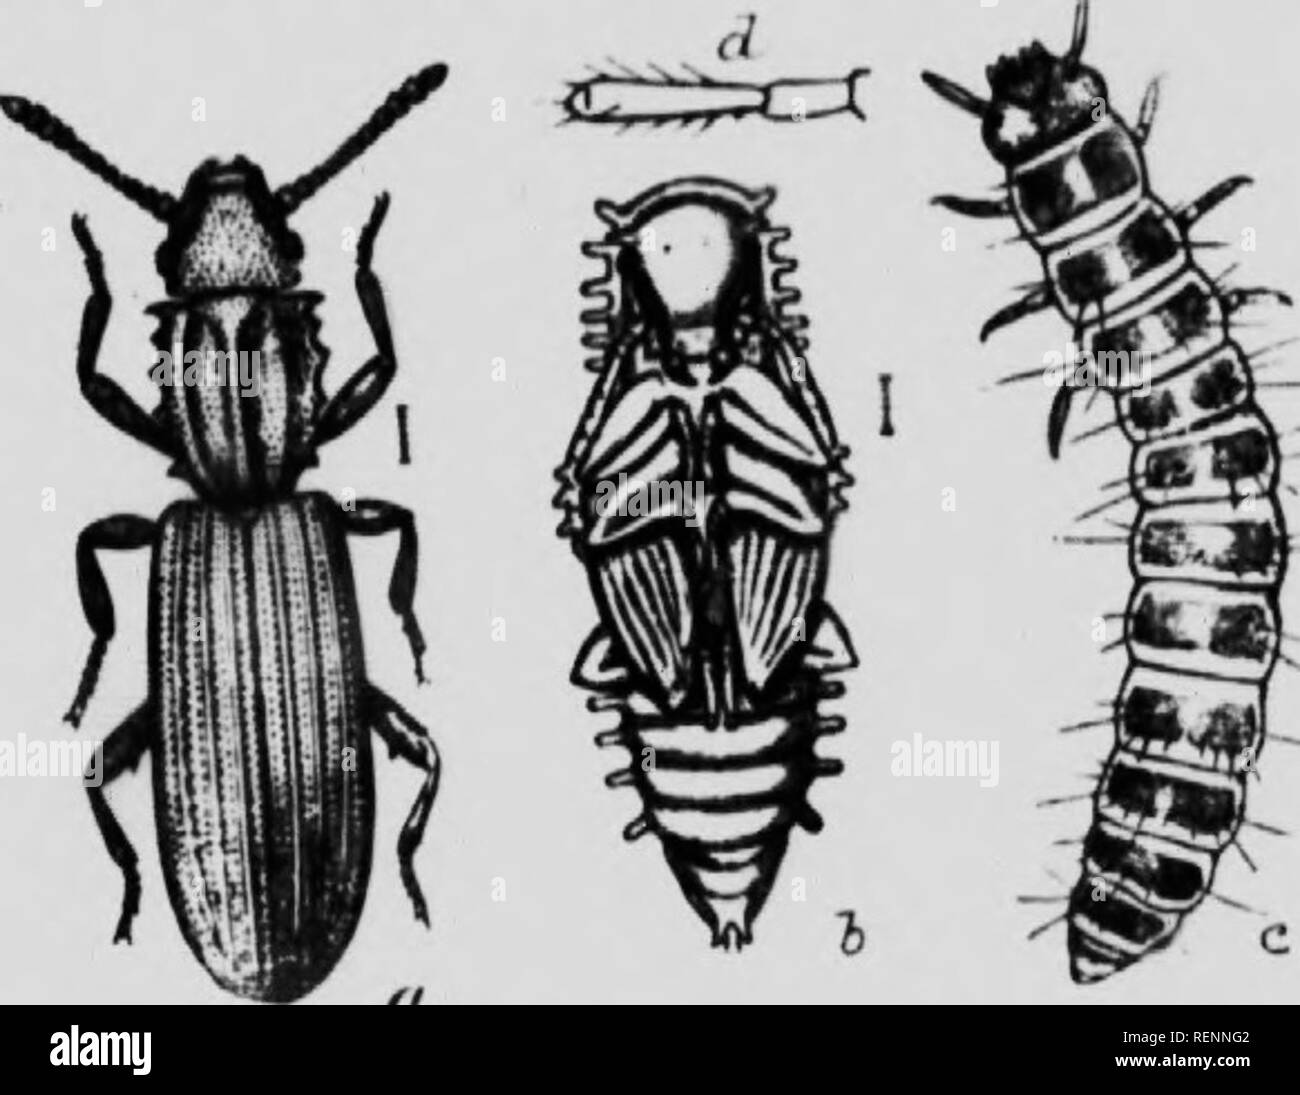 . Class book of economic entomology [microform] : with special reference to the economic insects of the northern United States and Canada. Insect pests; Entomologie; Entomology; Insectes nuisibles, Lutte contre les; Insect pests; Insectes nuisibles. M KioNiiMic »:Nri)M()i.opery. Often Hestru live in Ihe West U&gt; leKuminnus crops. June August. Ctiiilrol. Spniv willi arseniiiil solution. CUCUJIDiE Saw-toothed Grain-beetle iSihaniis surinamensis Linn ).  widely (lislril)Uteil l)cclle, (eeilin« on siored Krain ami their produi i and on starchy kooiIs l'Ki»!. -Mil. .[dull. -. minute llalleiu-d  Stock Photo